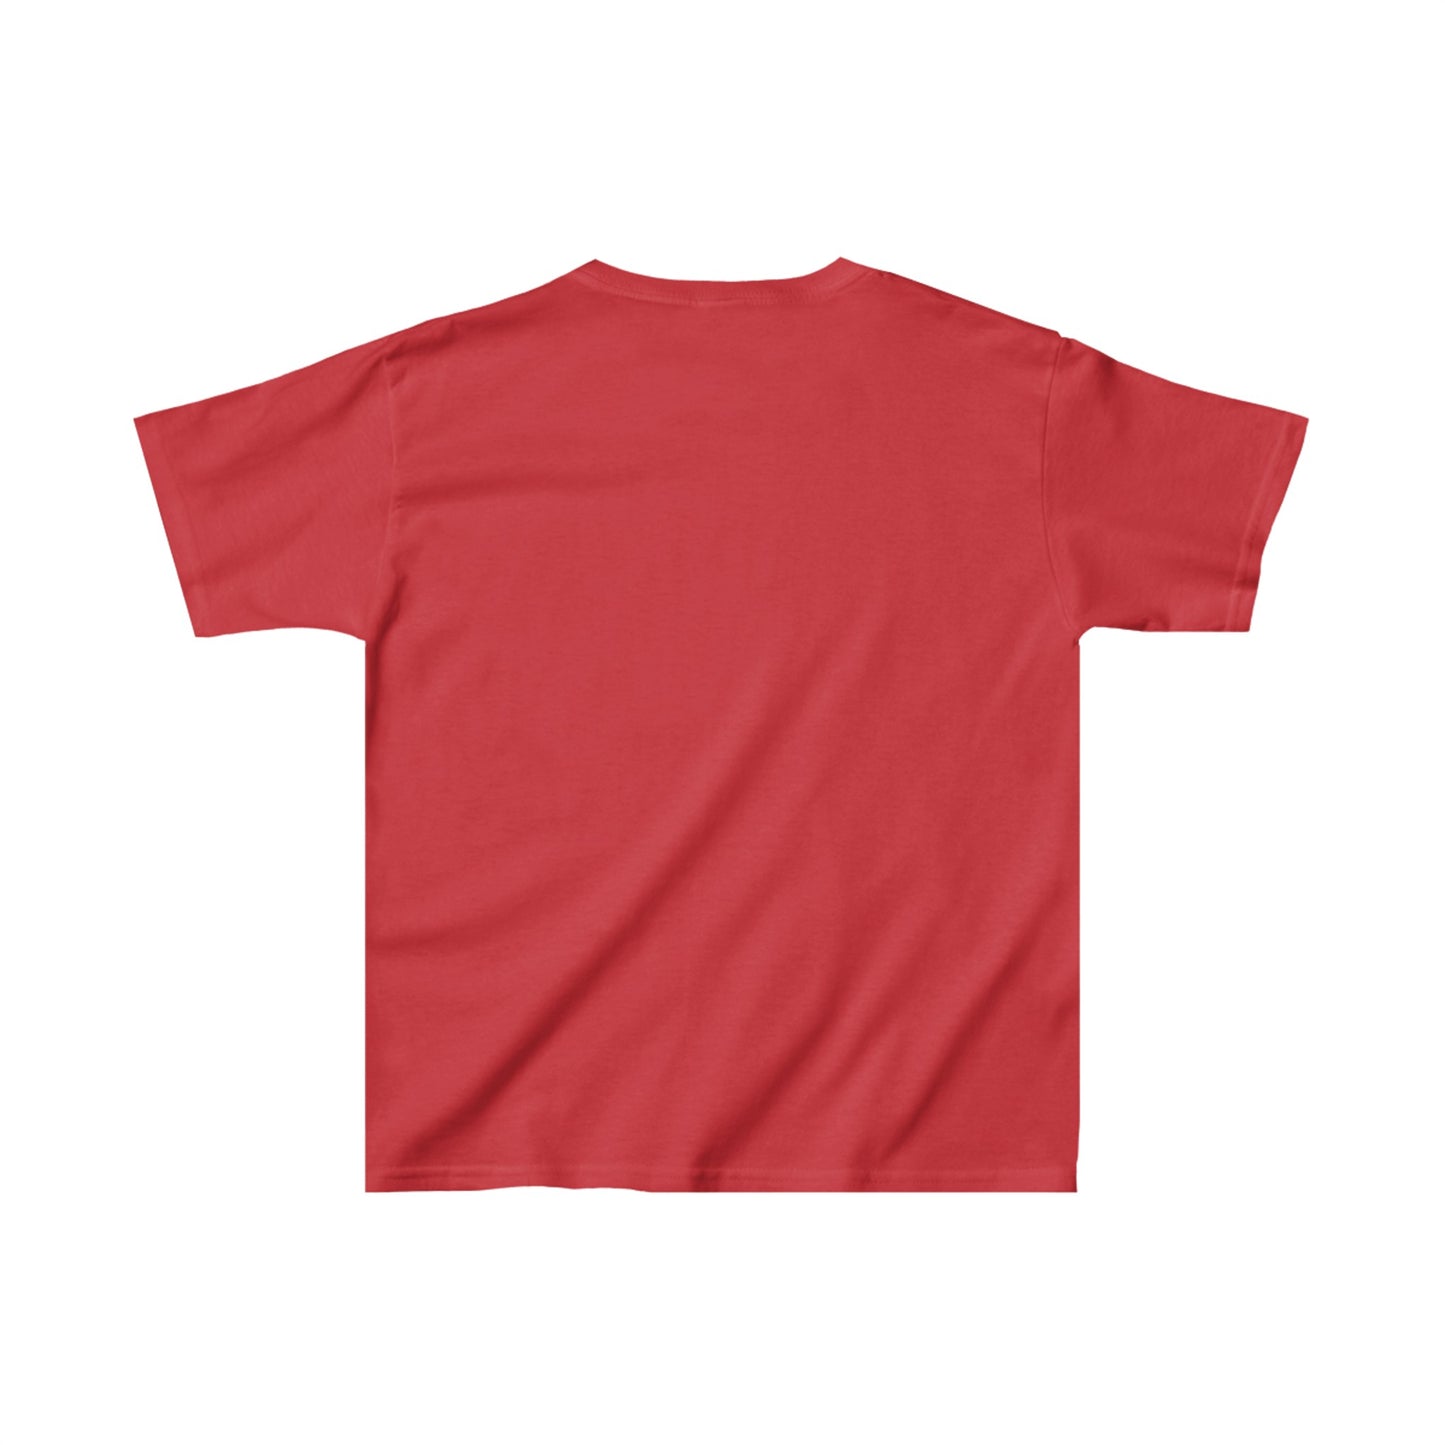 T-Shirt YOUTH: 1st Recruit Battalion (Red)